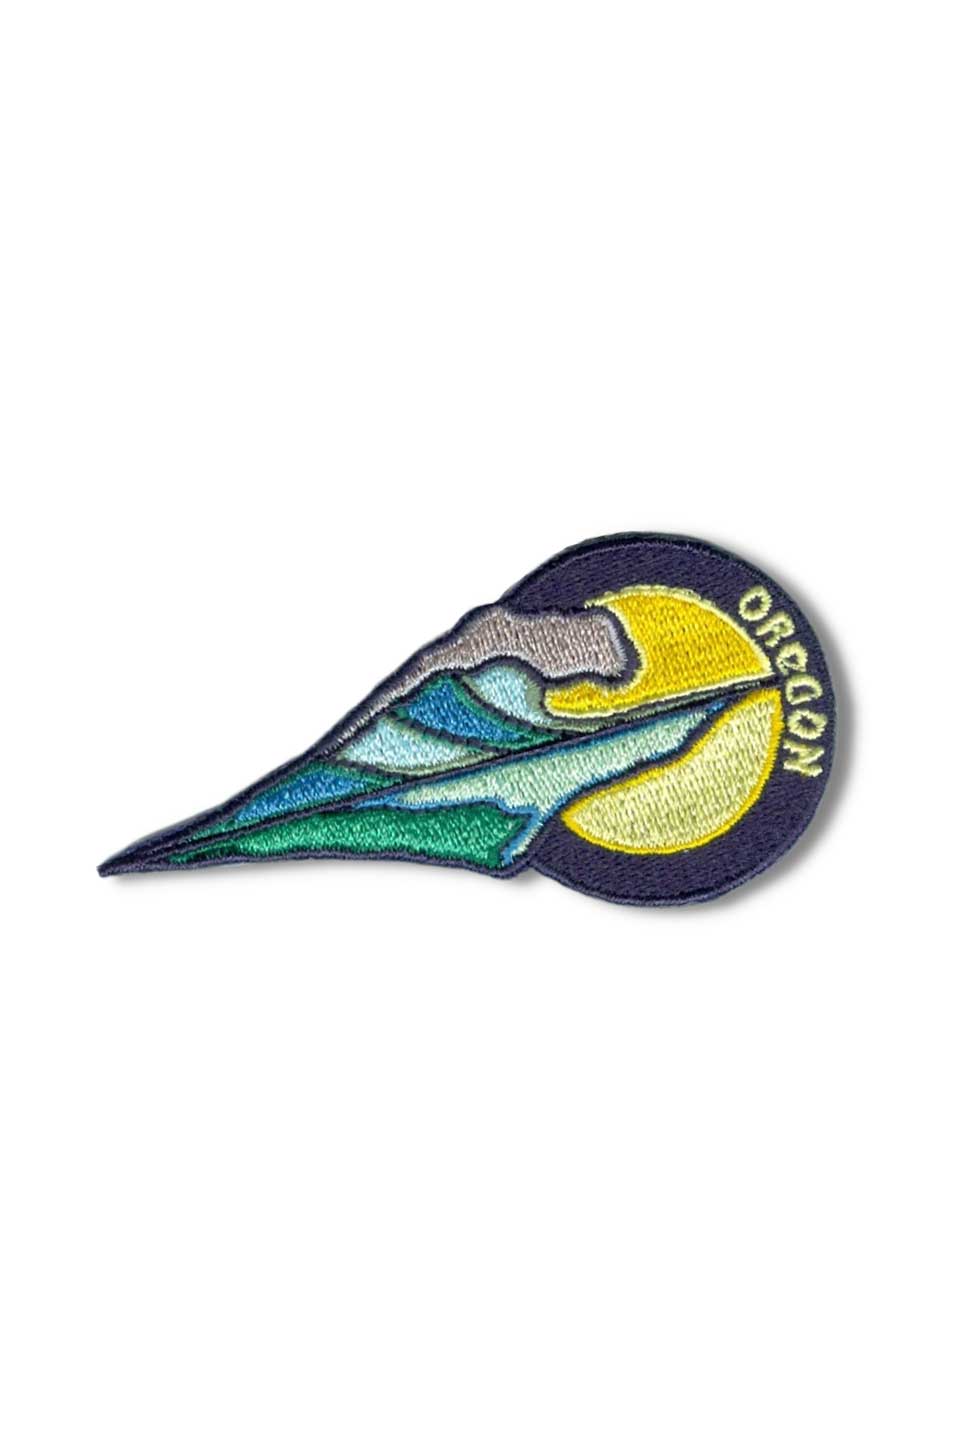 Outpatch - OR Coast Range Patch - Front